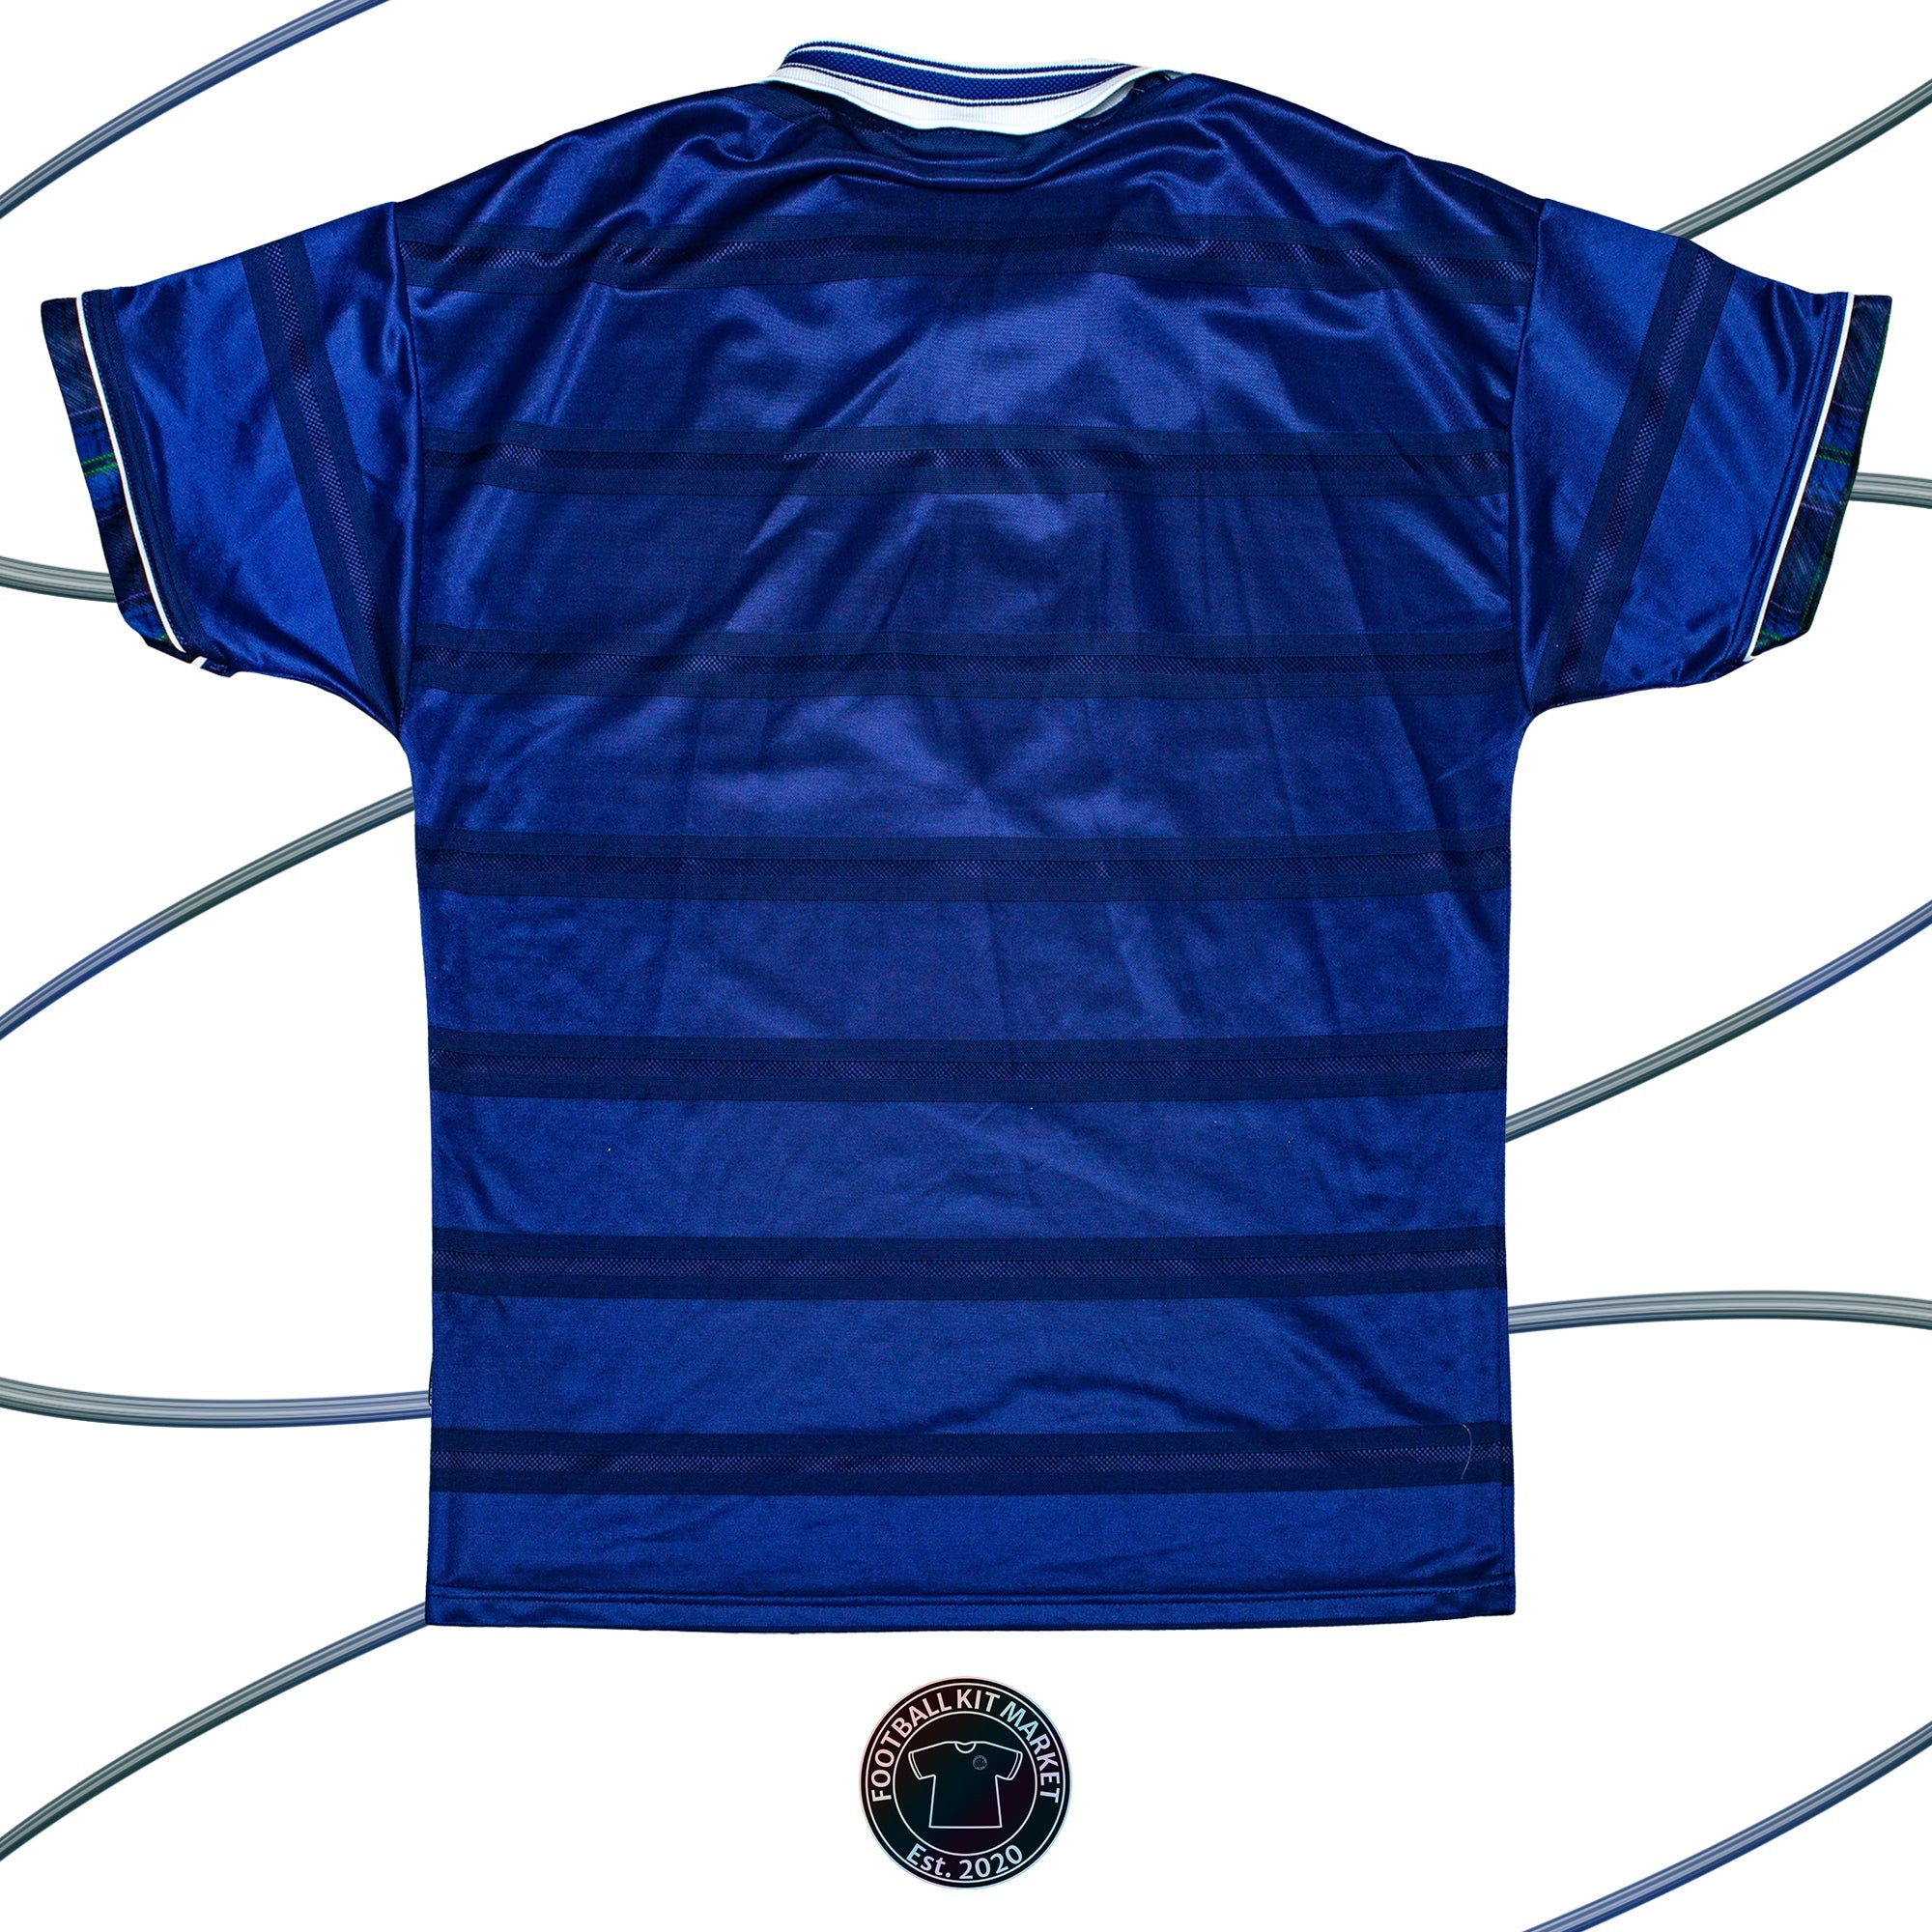 Genuine SCOTLAND Home (1998-2000) - UMBRO (L) - Product Image from Football Kit Market